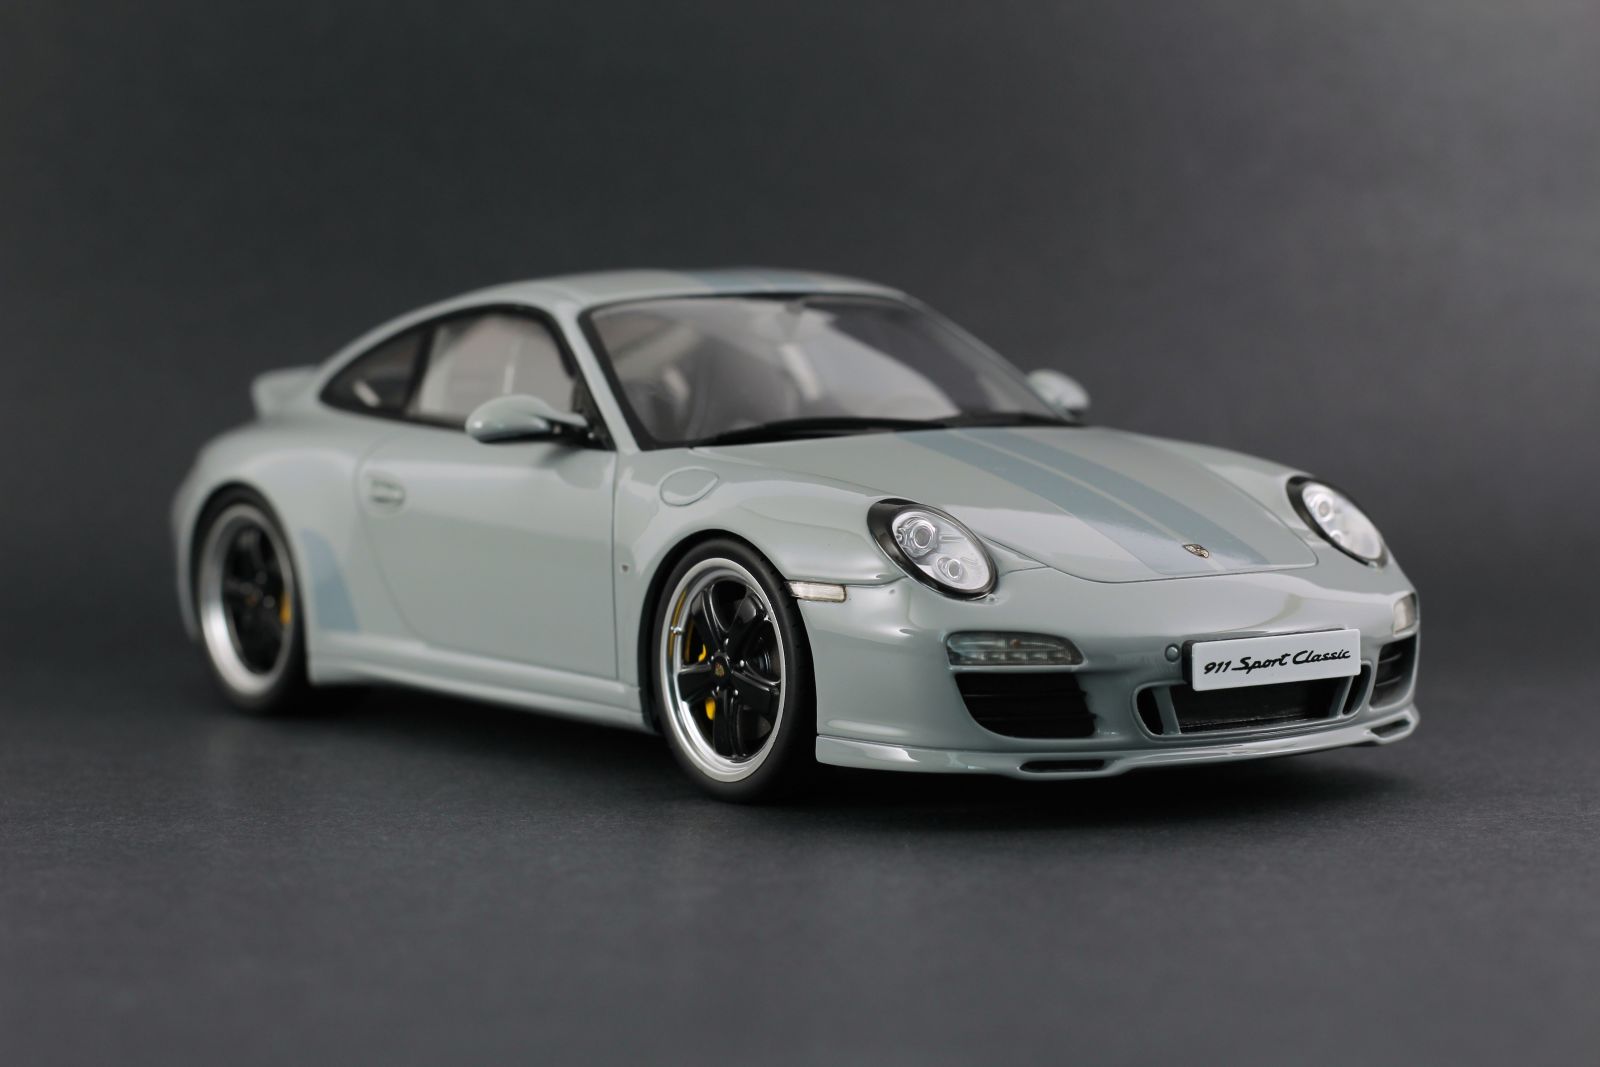 Illustration for article titled Porsche Perfection: 997 Sport Classic